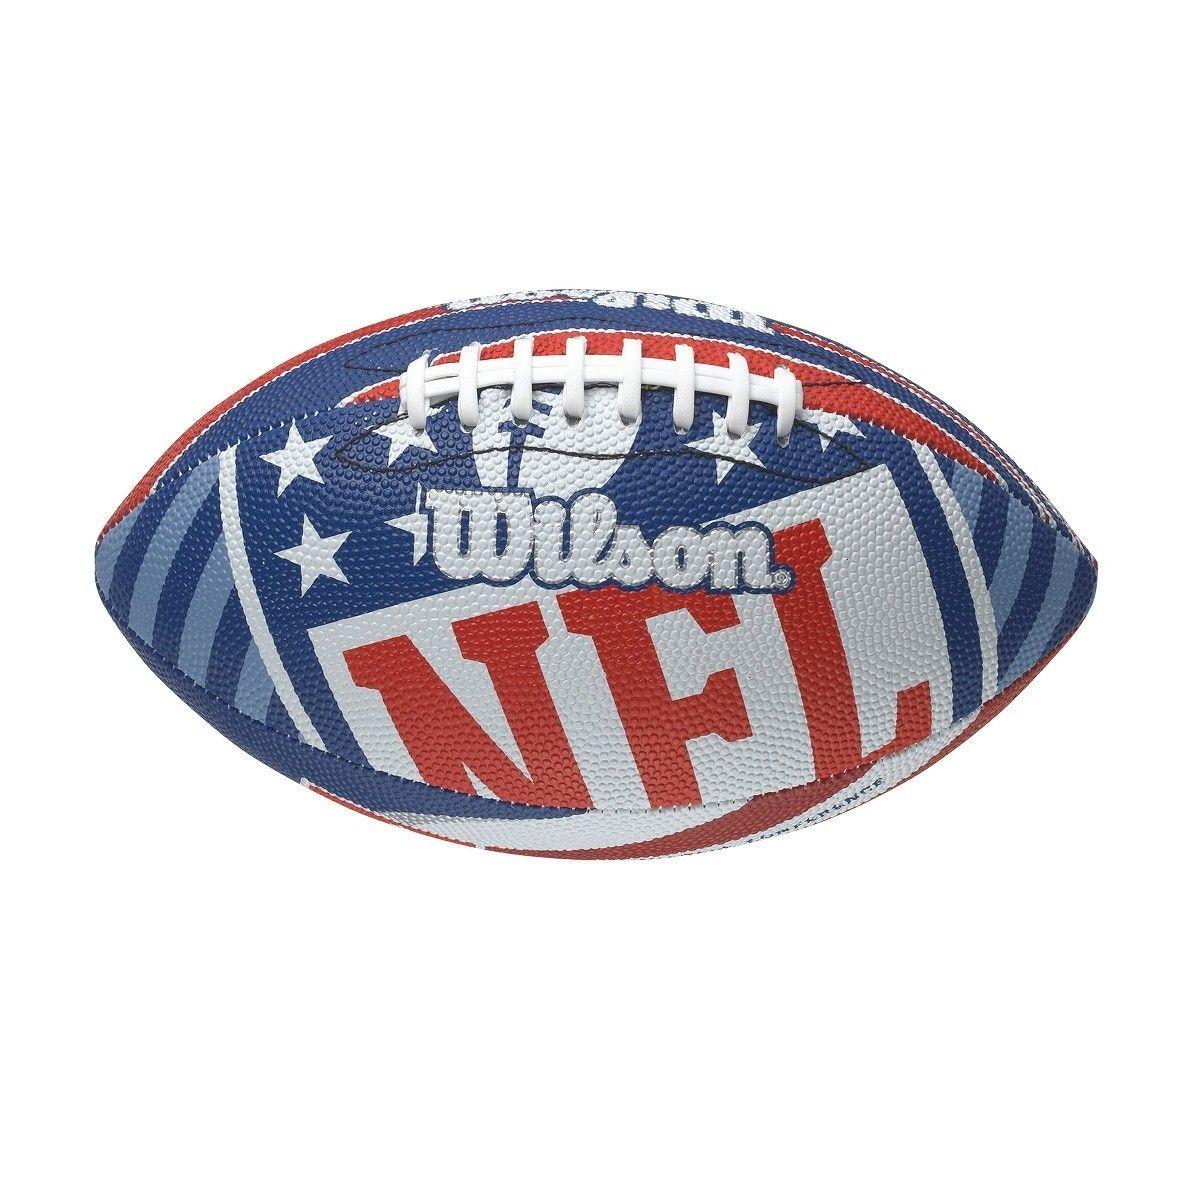 Red White and Blue Sports Team Logo - Wilson NFL Team Logo American Football | Blue / White / Red | A&A Sports